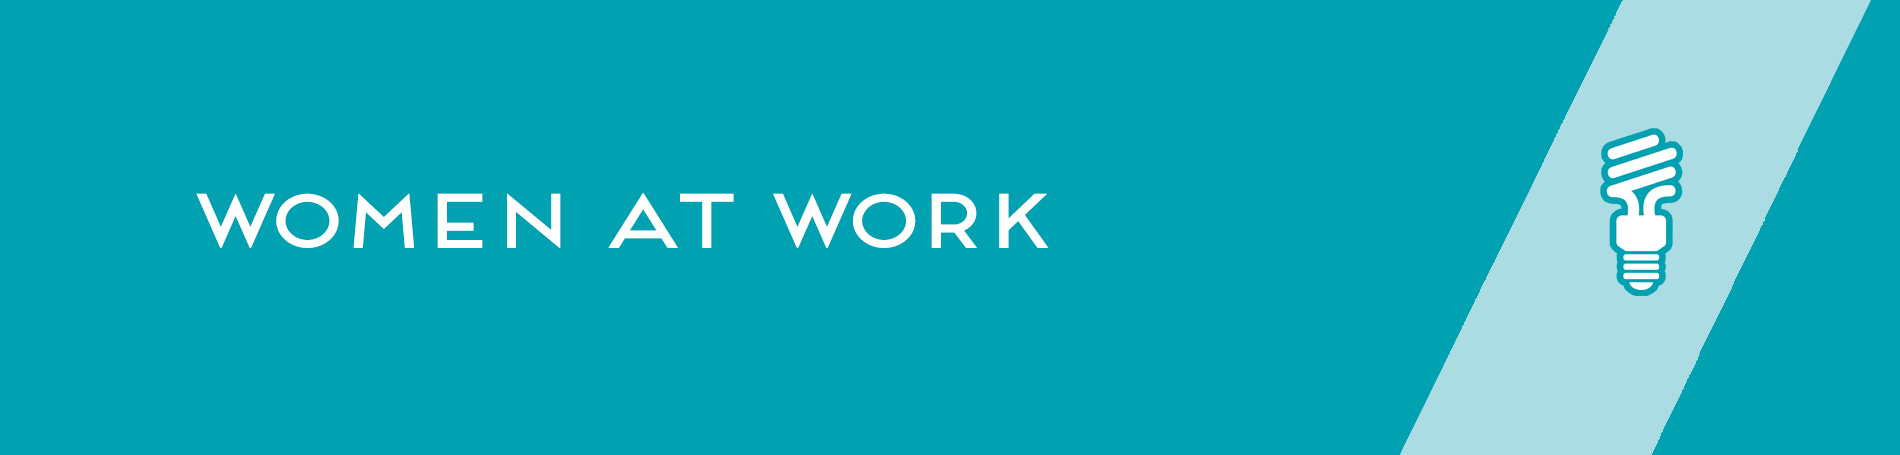 Turquoise background with text (left) that reads "Women at Work" and a ray of light showing a light bulb(right).